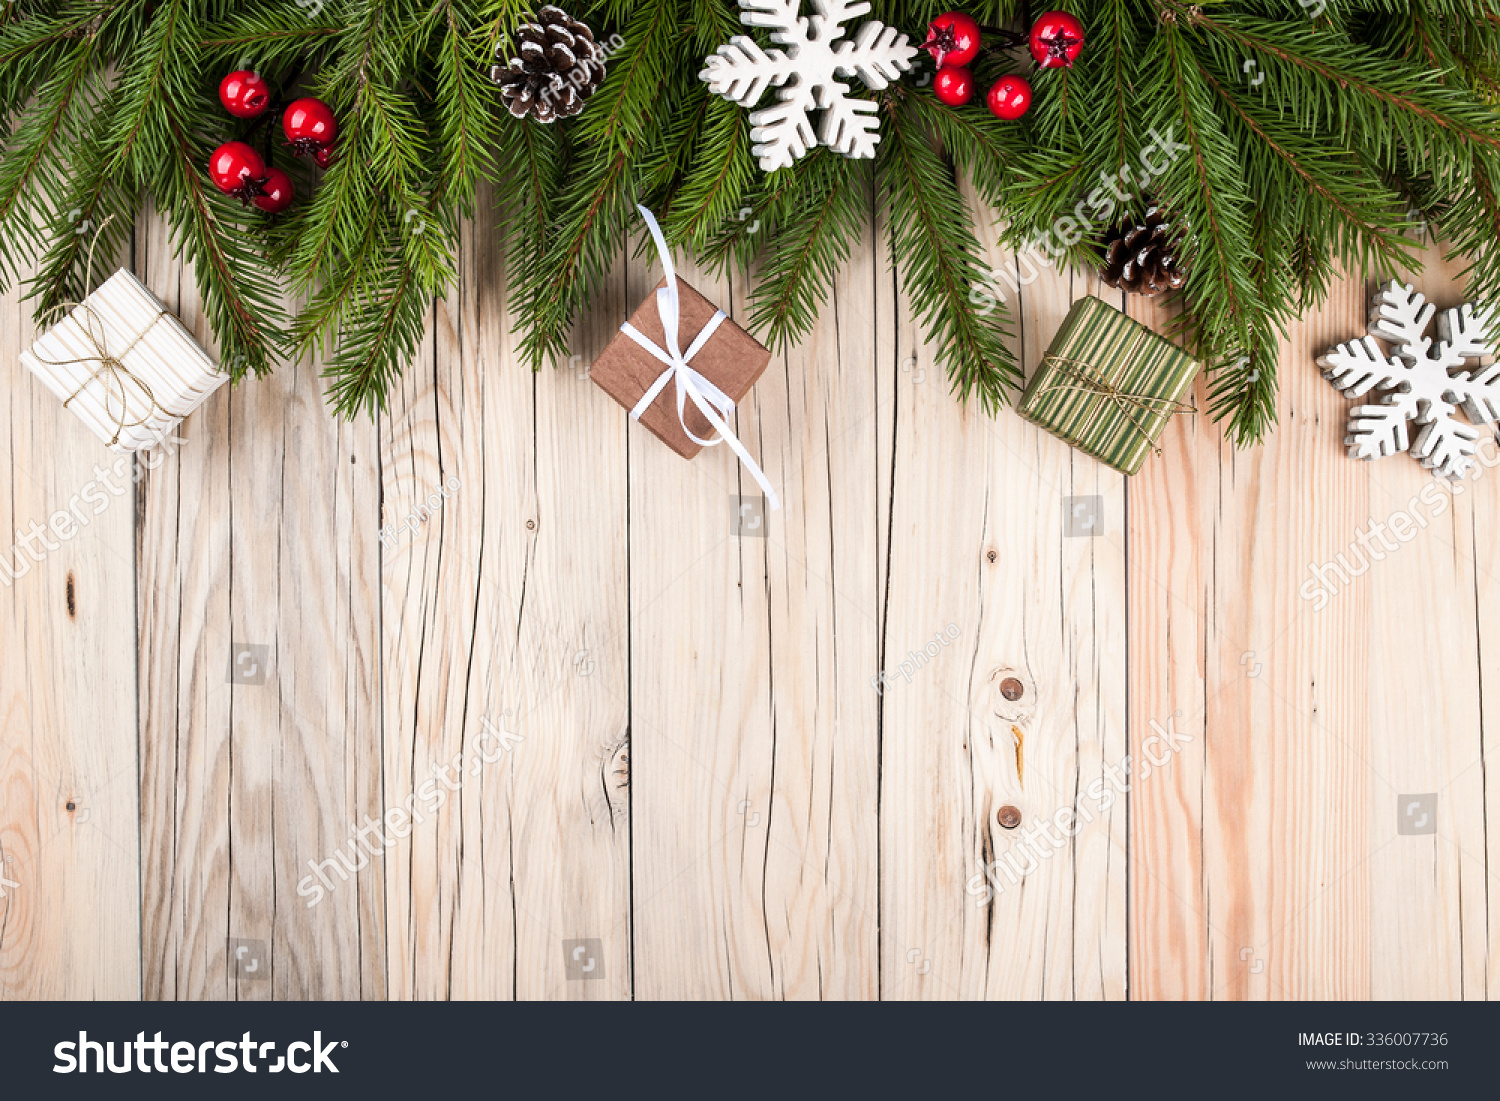 Fir tree with christmas decorations and gift boxes on wooden background #336007736